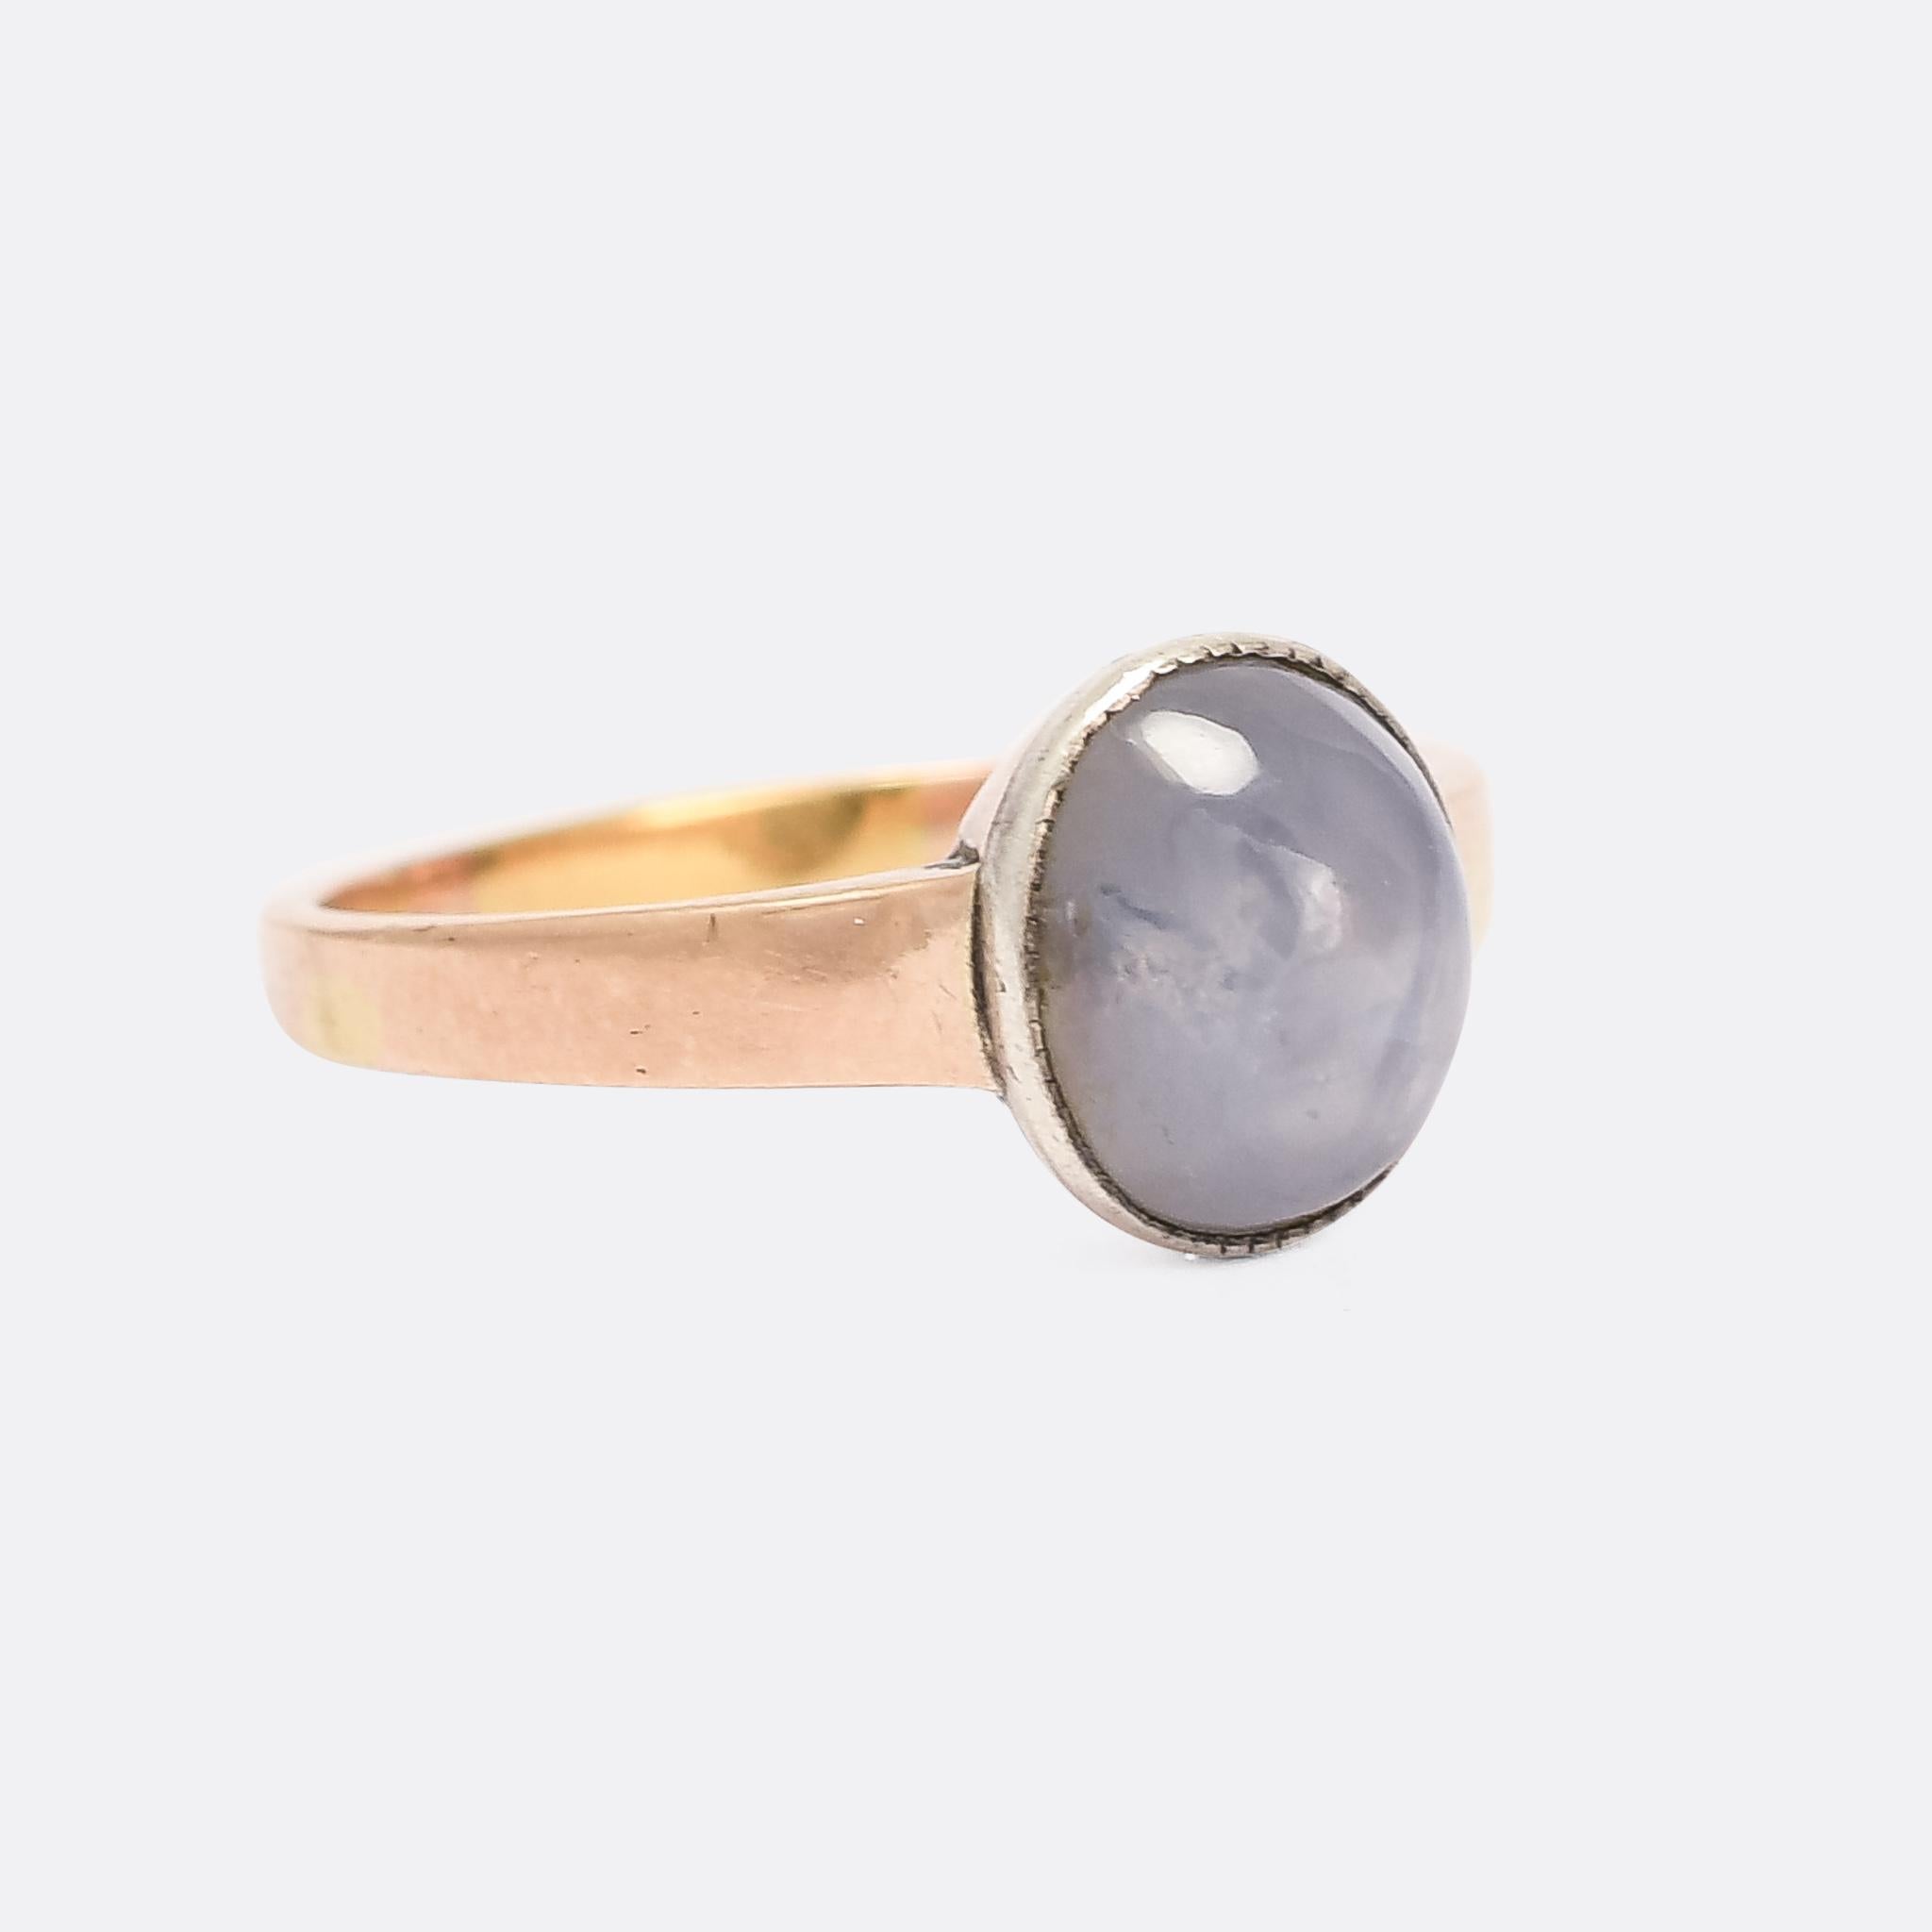 A gorgeous antique solitaire ring set with a blue star sapphire cabochon. It's French, with swan and clover hallmarks for silver and 9k gold respectively, and was made around the turn of the 20th Century. The stone displays six pointed asterism,